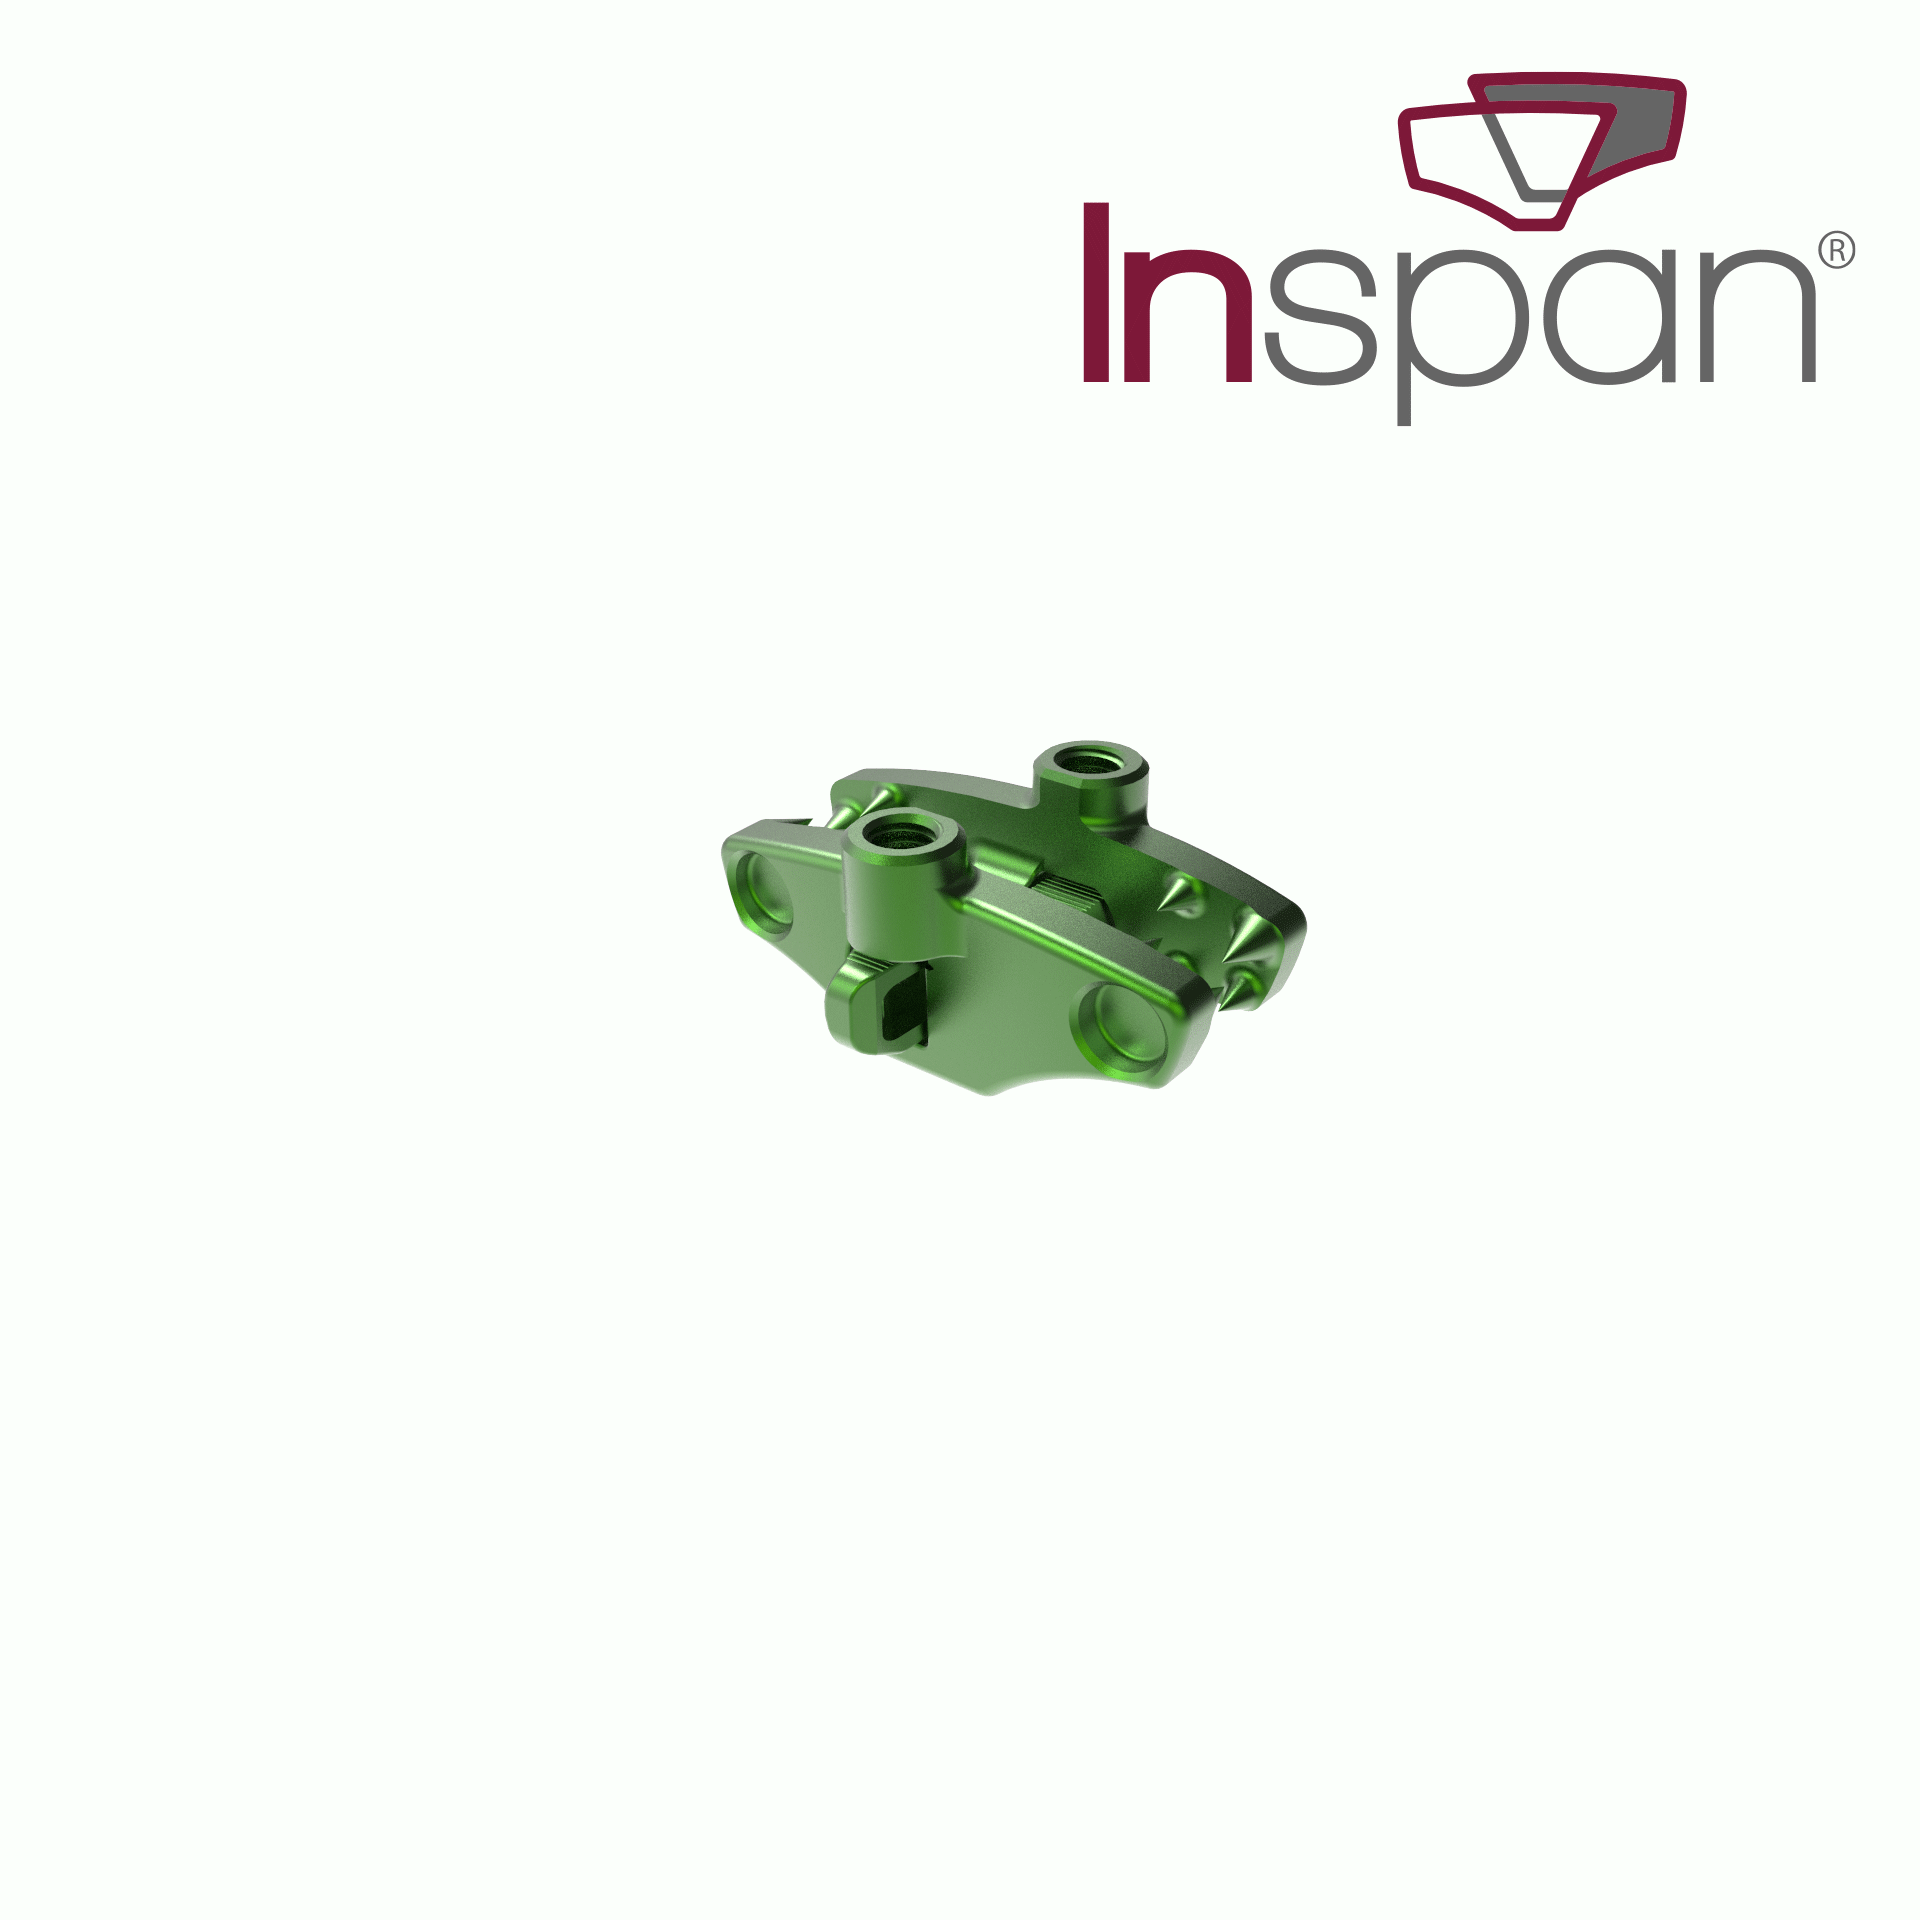 The Inspan Interspinous-Interlaminar Fixation Device from INSPAN, LLC